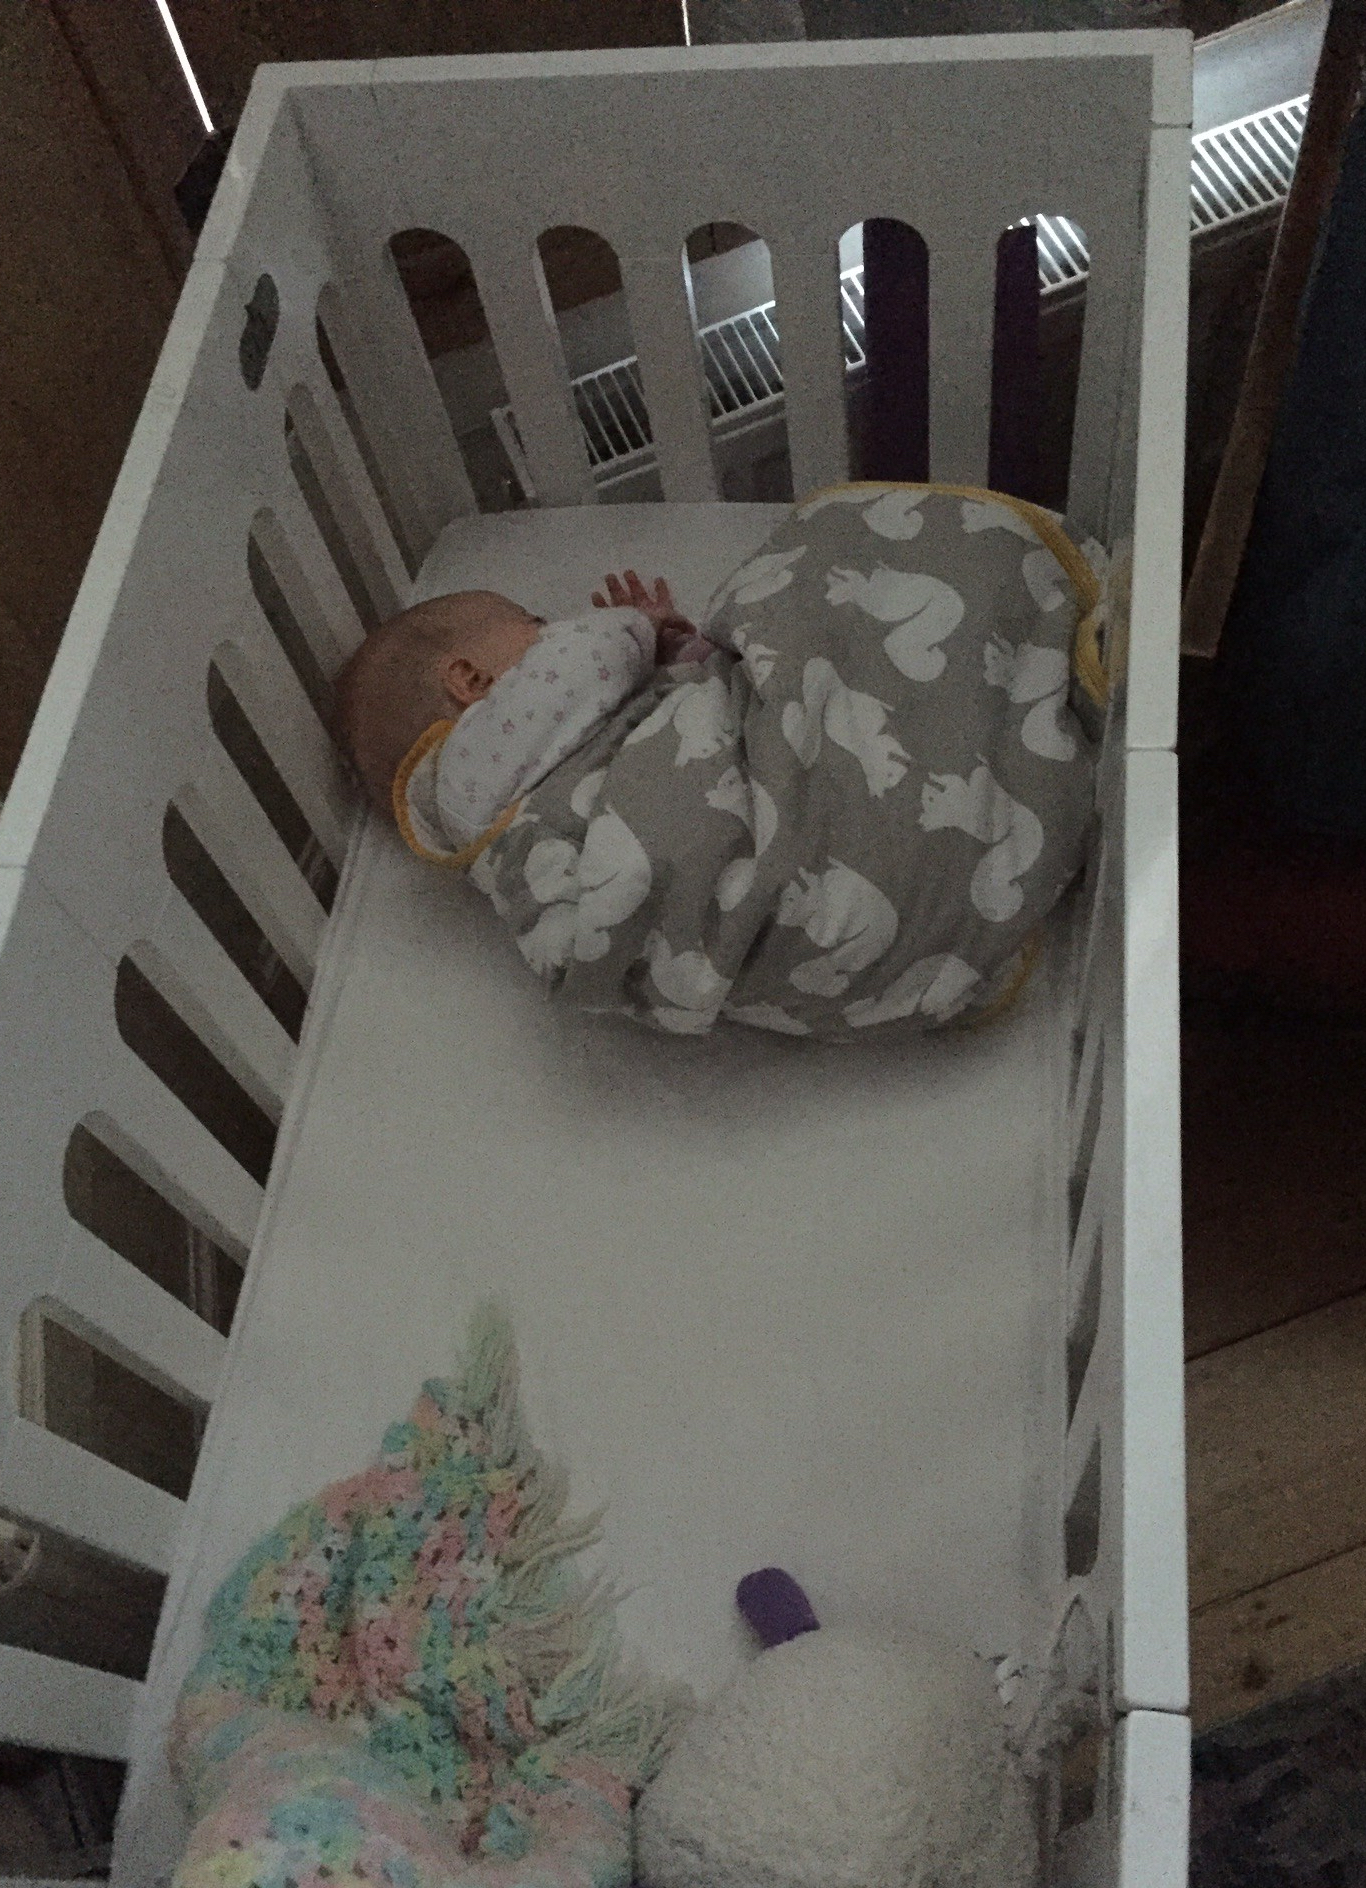 A baby wearing a sleeping bag sleeps curled up in a ball at one end of a cot.